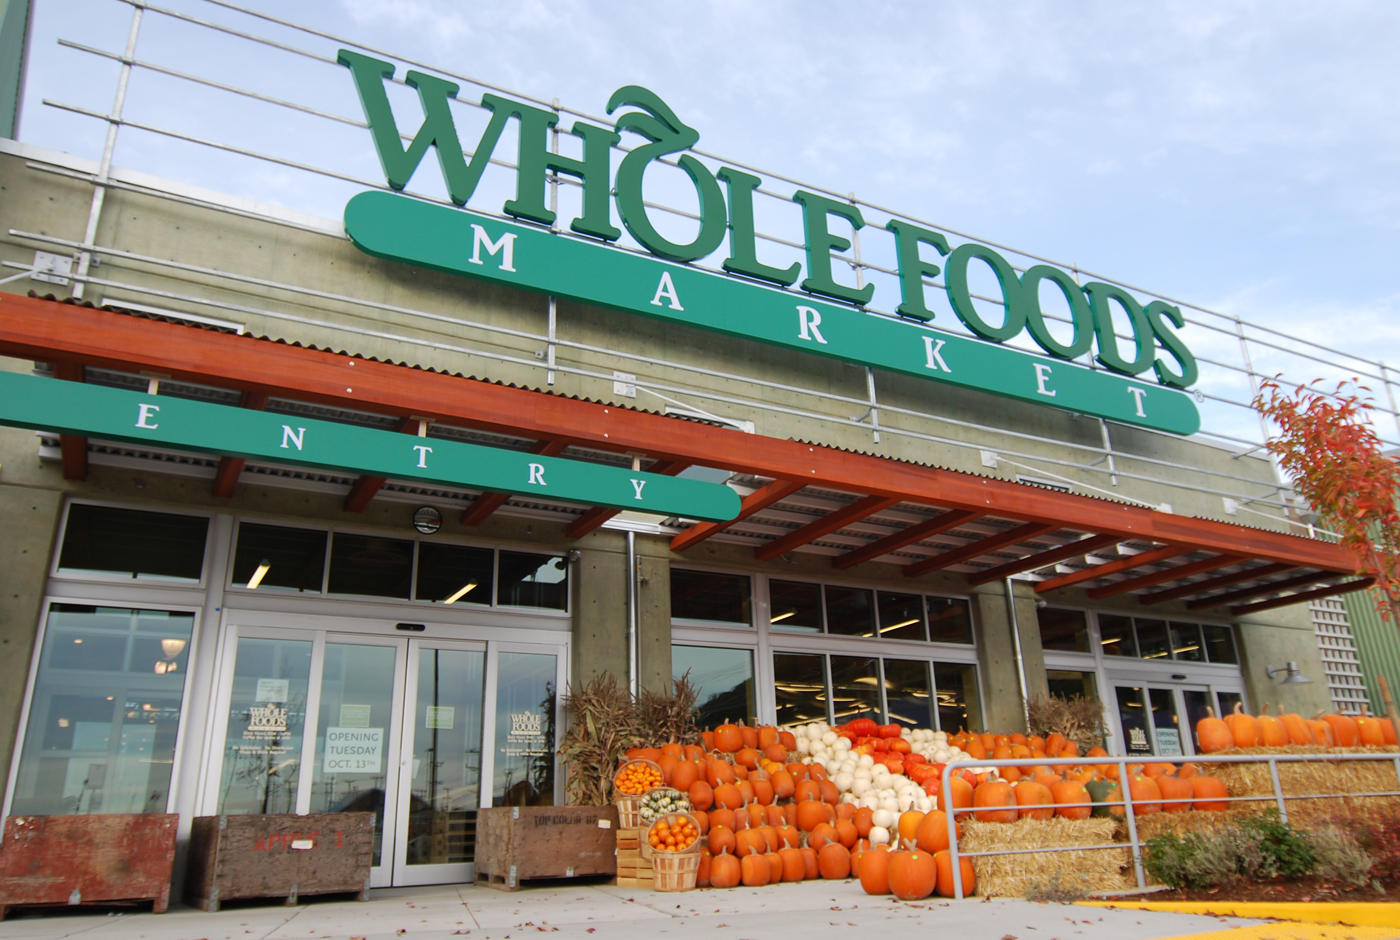 Find a Whole Foods Market Store Near You